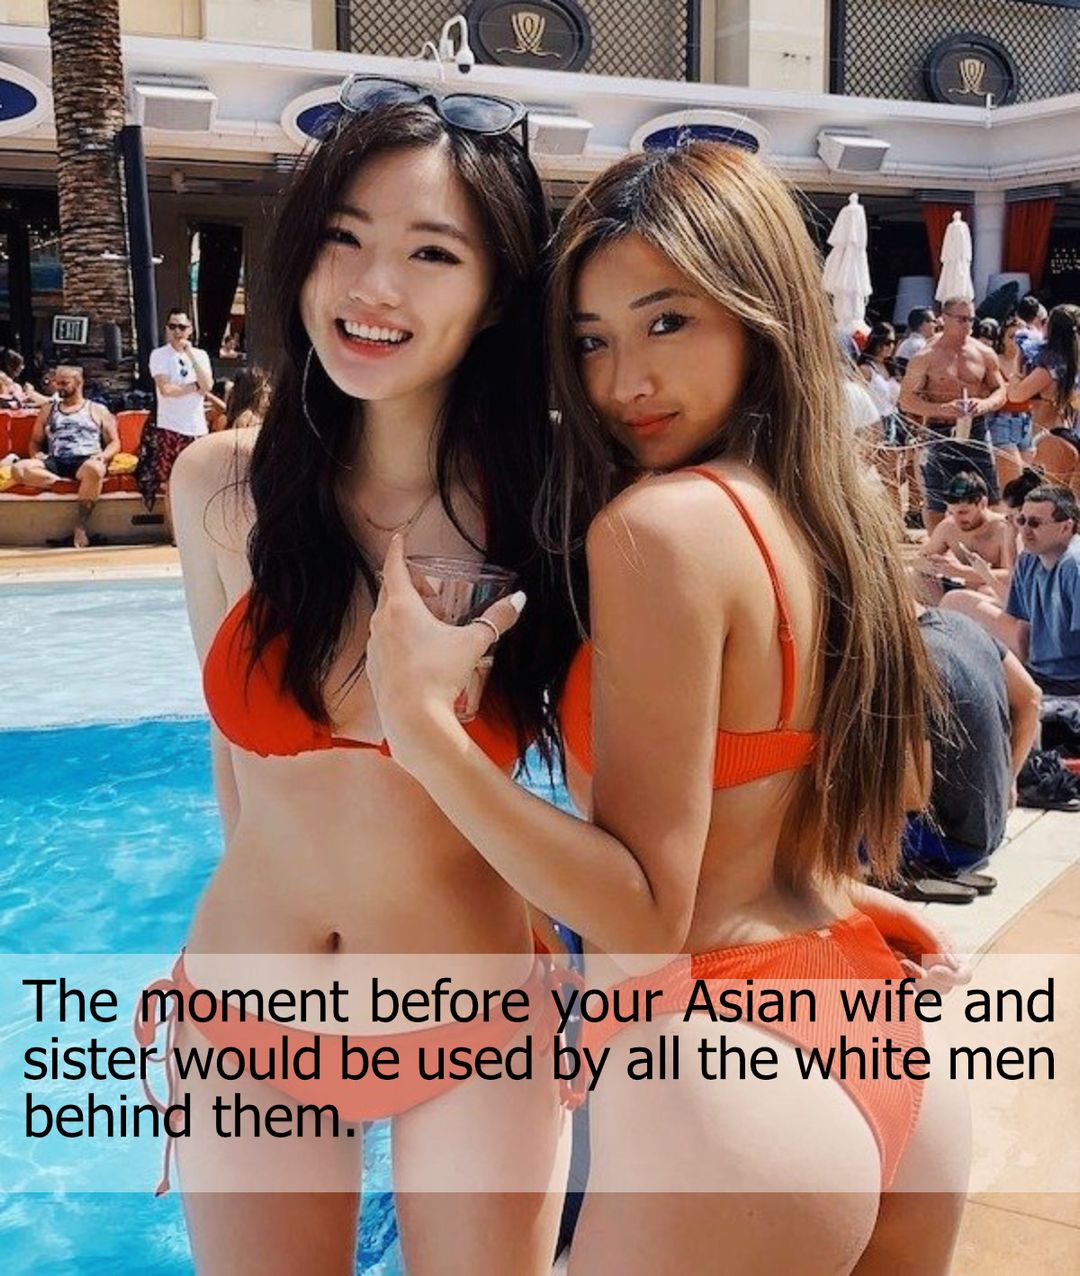 Your Asian wife and sister at the pool party Scrolller